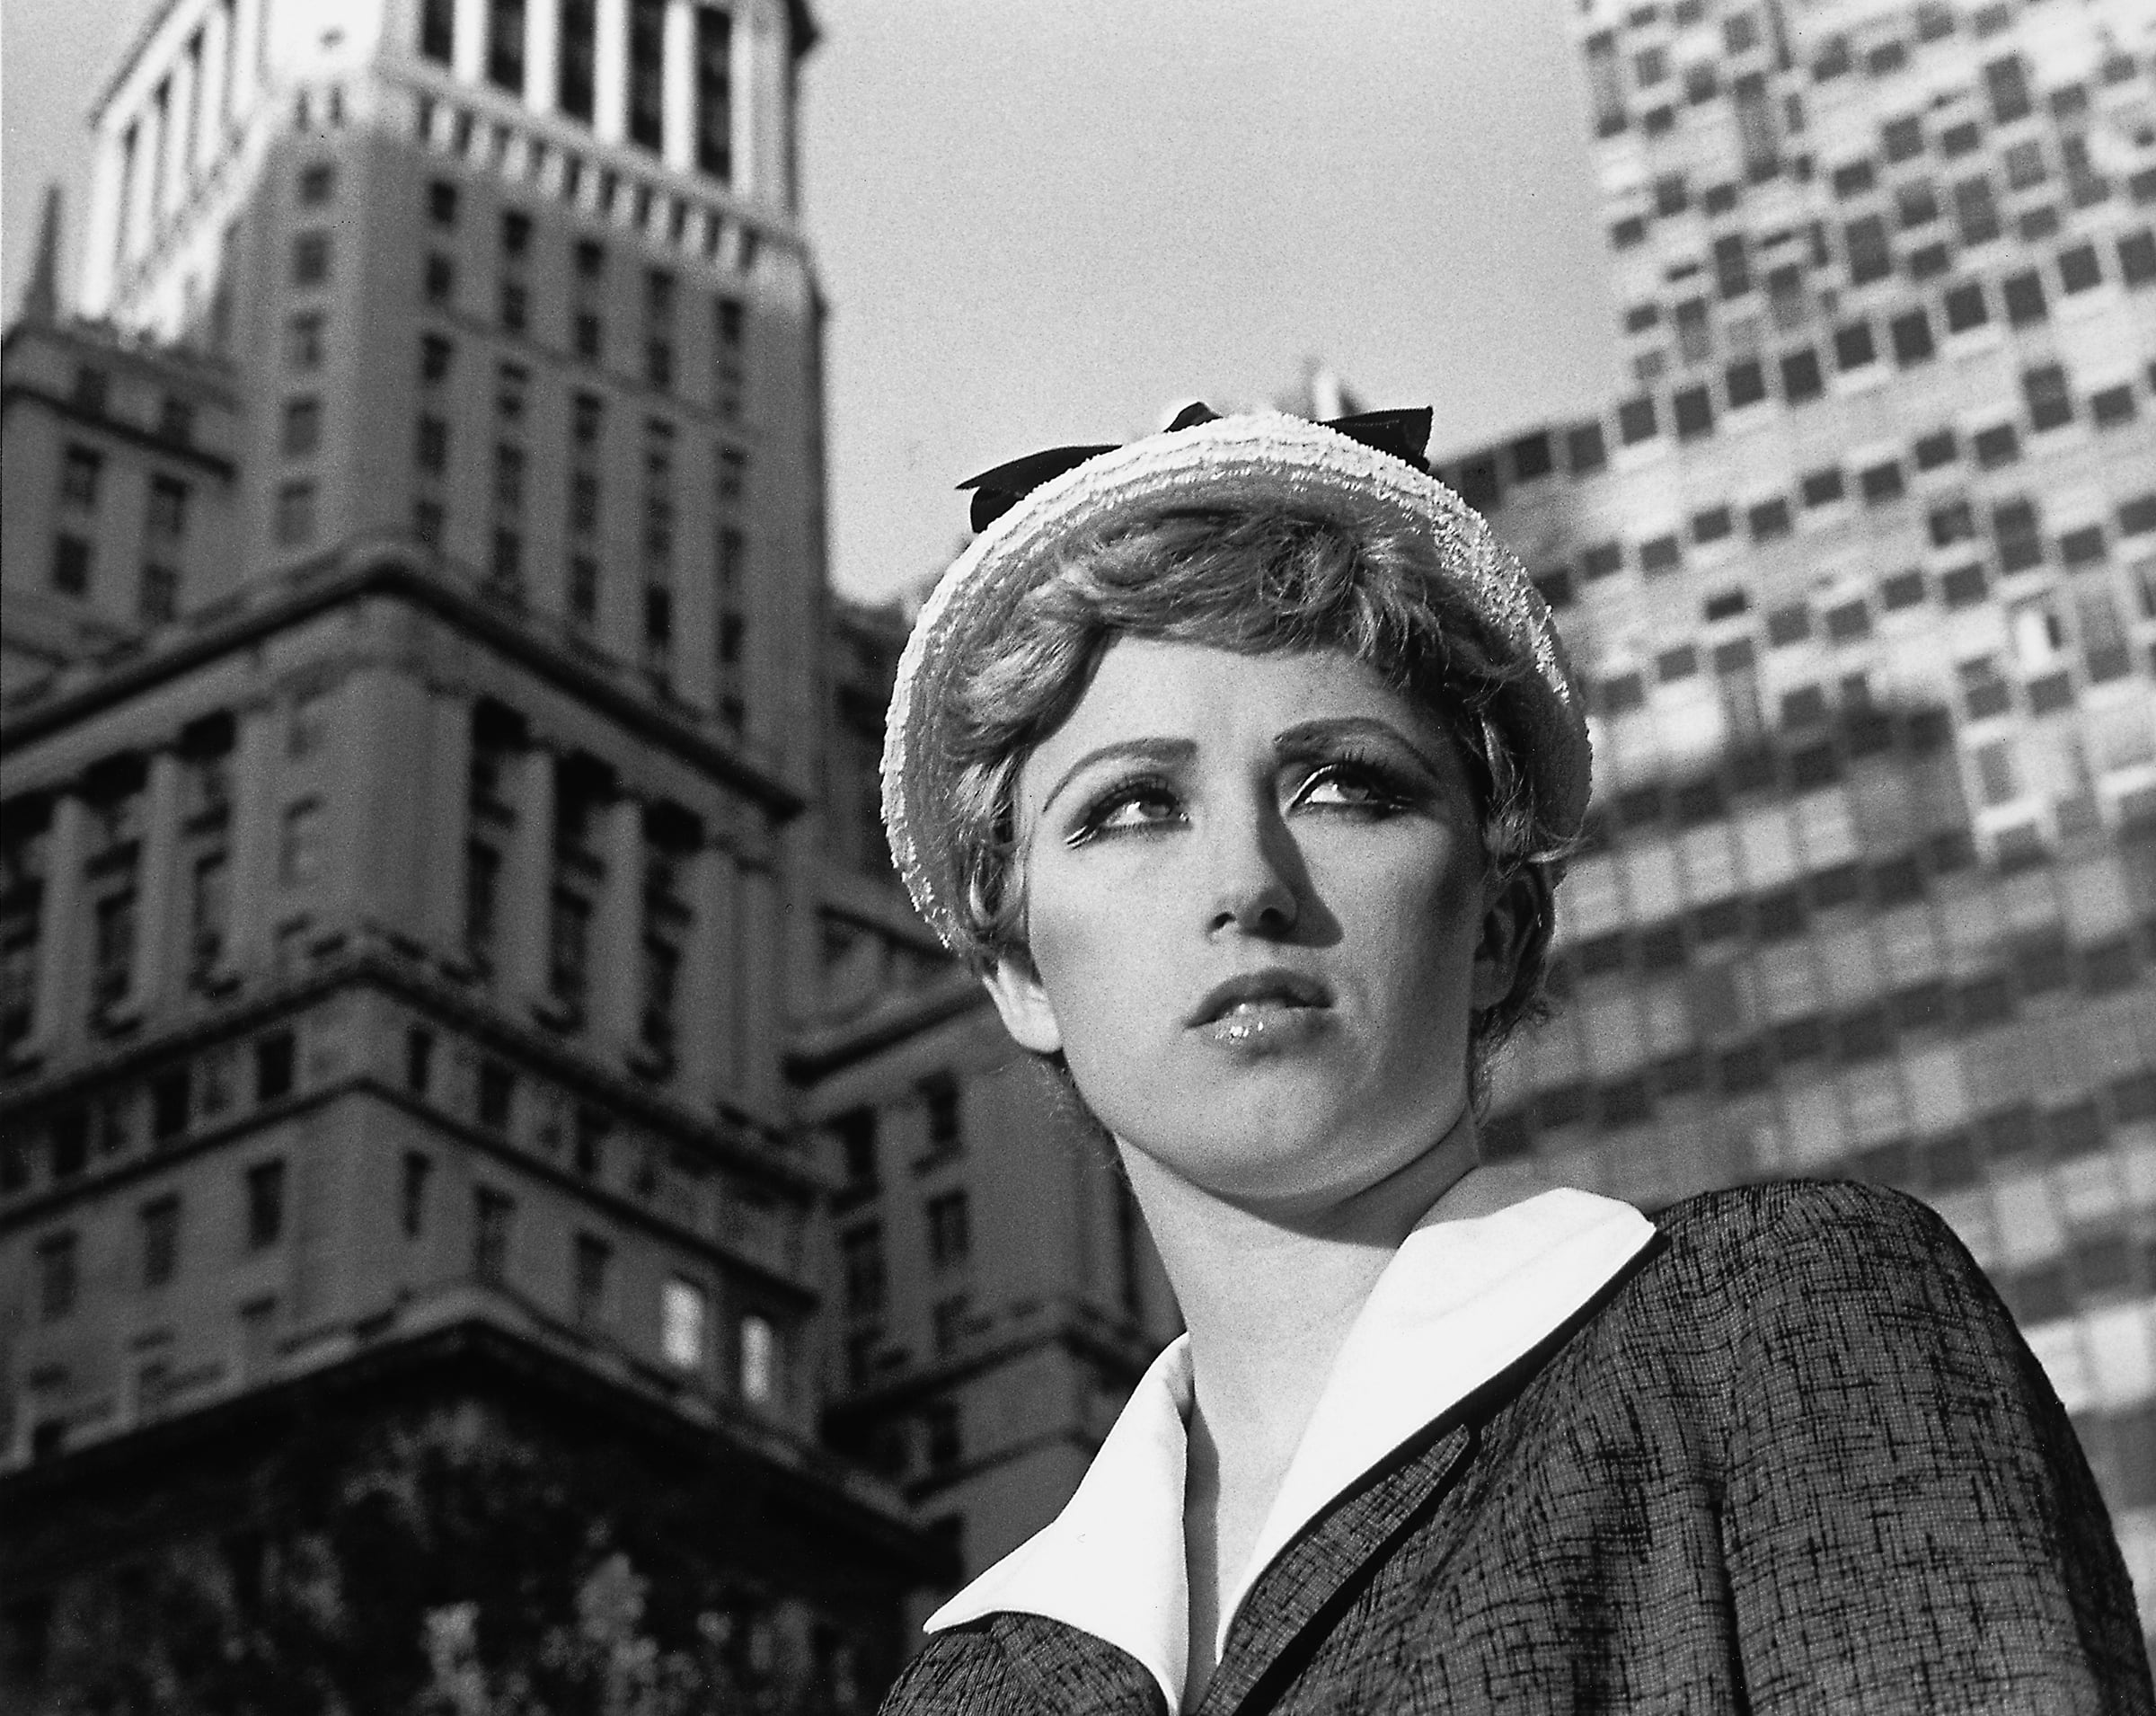 Cindy Sherman, Untitled Film Still (#21), 1978. Courtesy of the Rubell Museum DC.